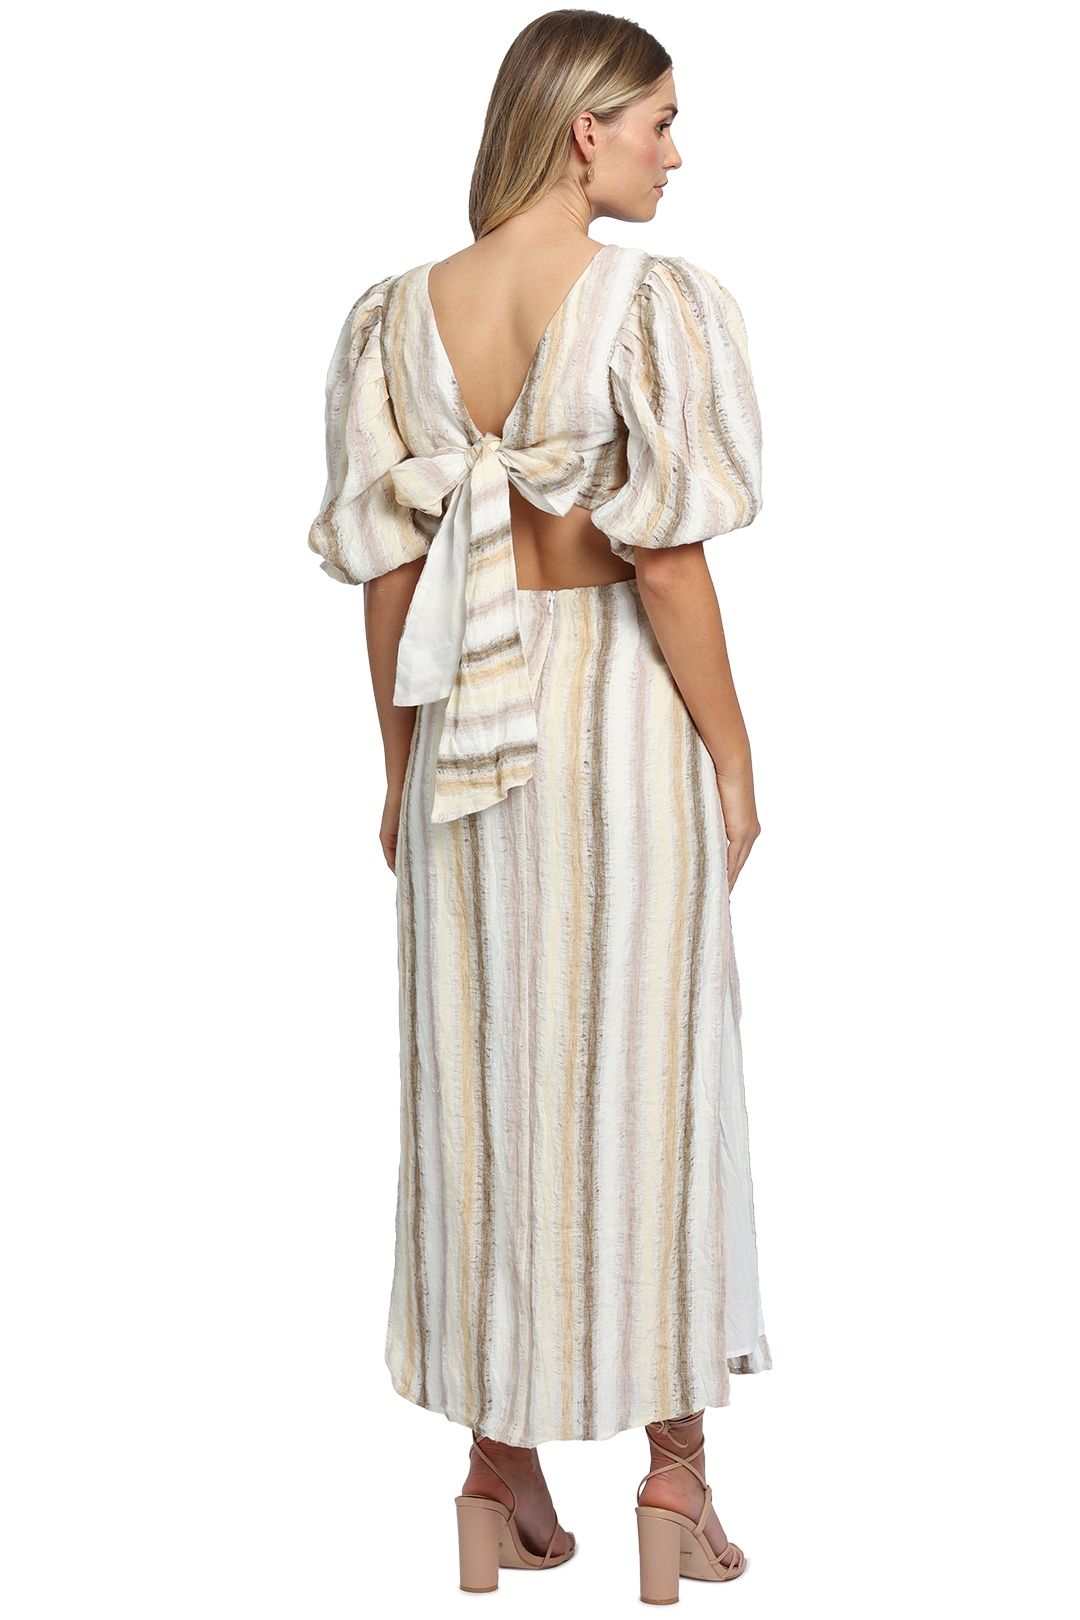 Ministry of Style Seventies Soul Stripe Maxi Dress balloon